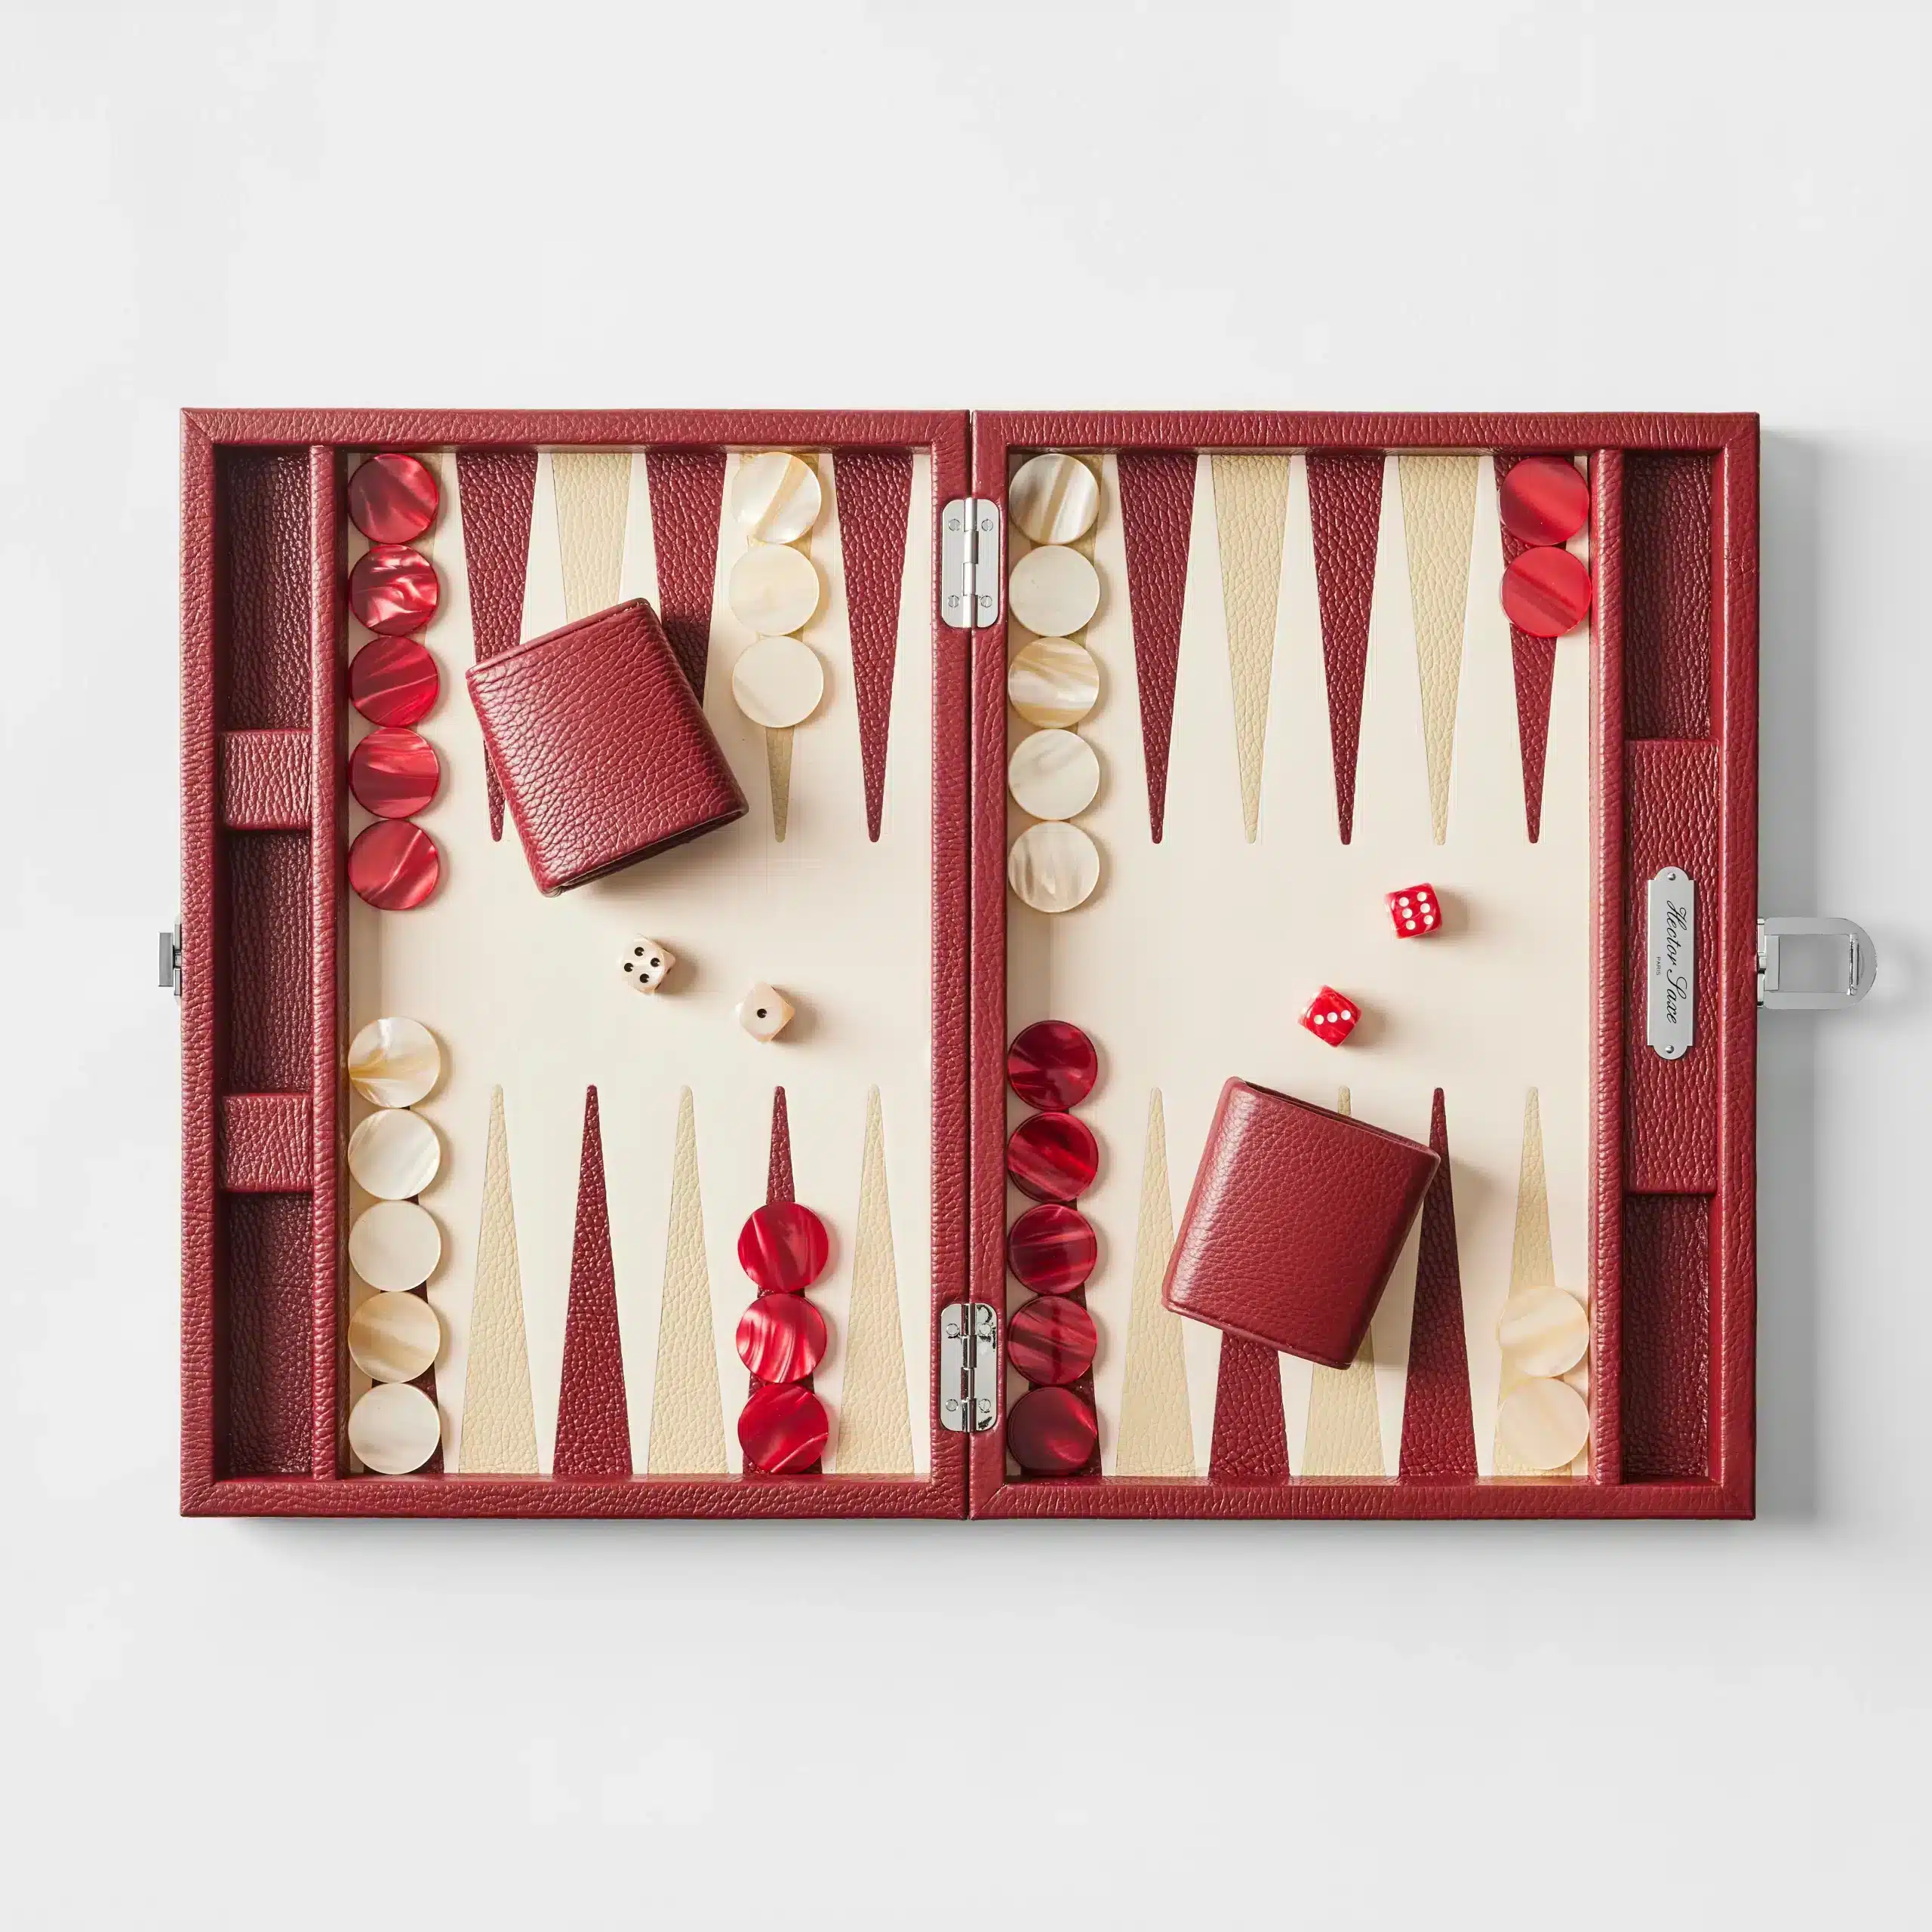 table_top_backgammon_cremisi_and_ivory_silo_mj_kroeger_0469